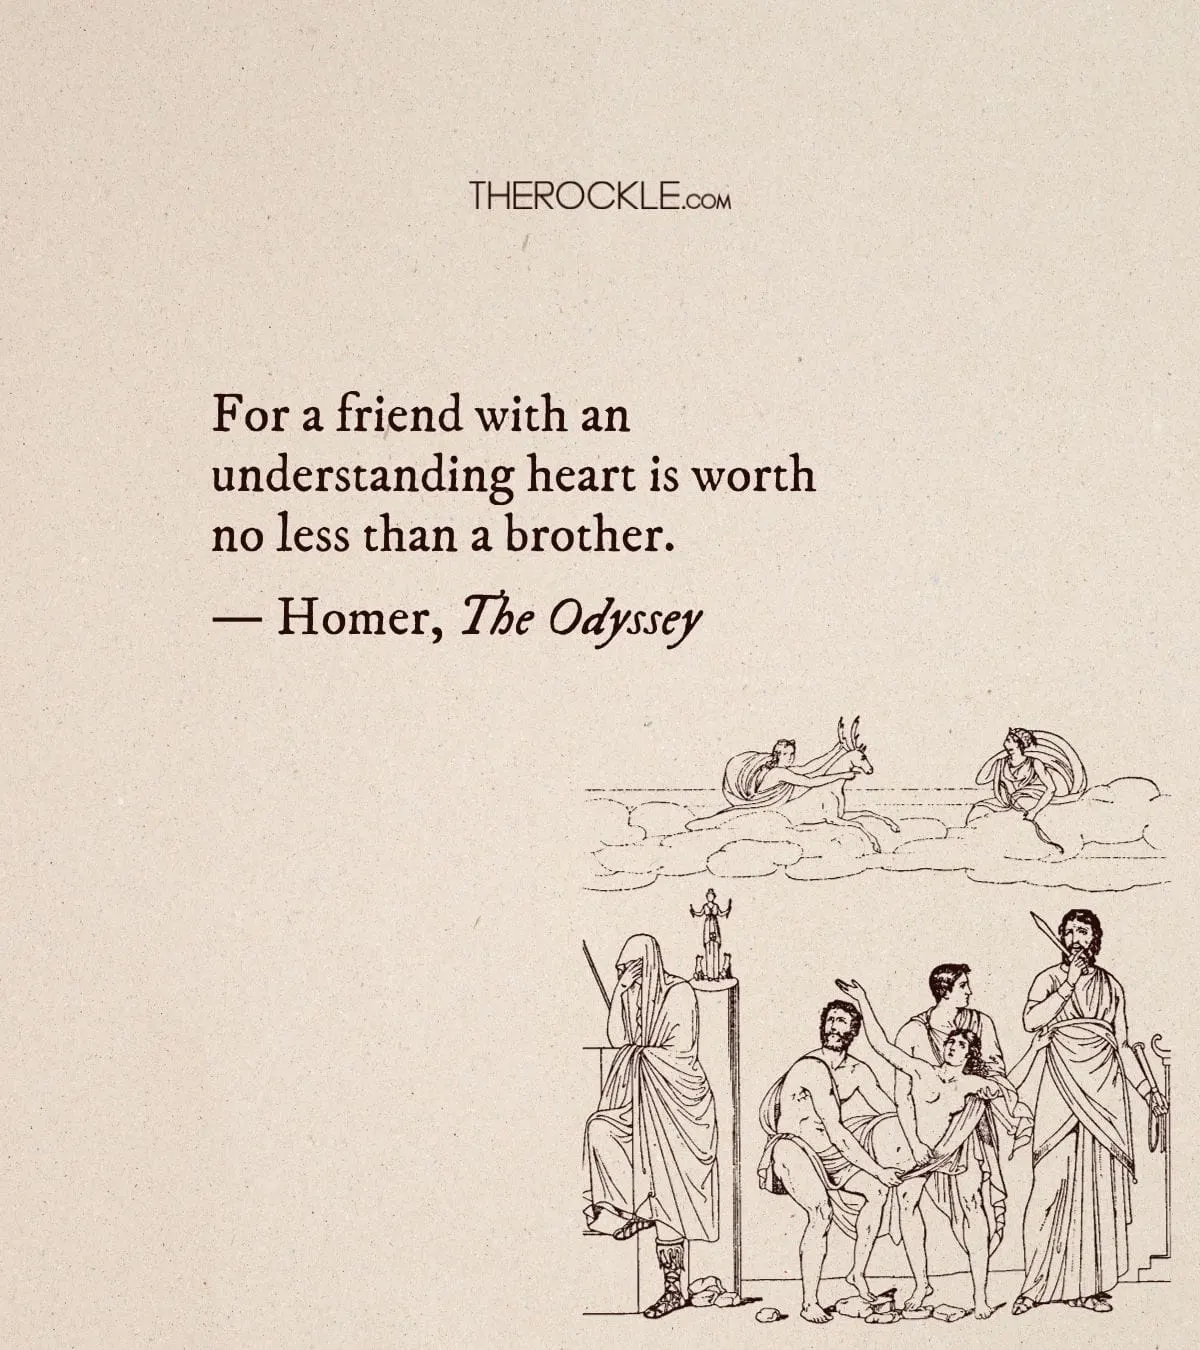 Homer's quote about friendship from The Odyssey